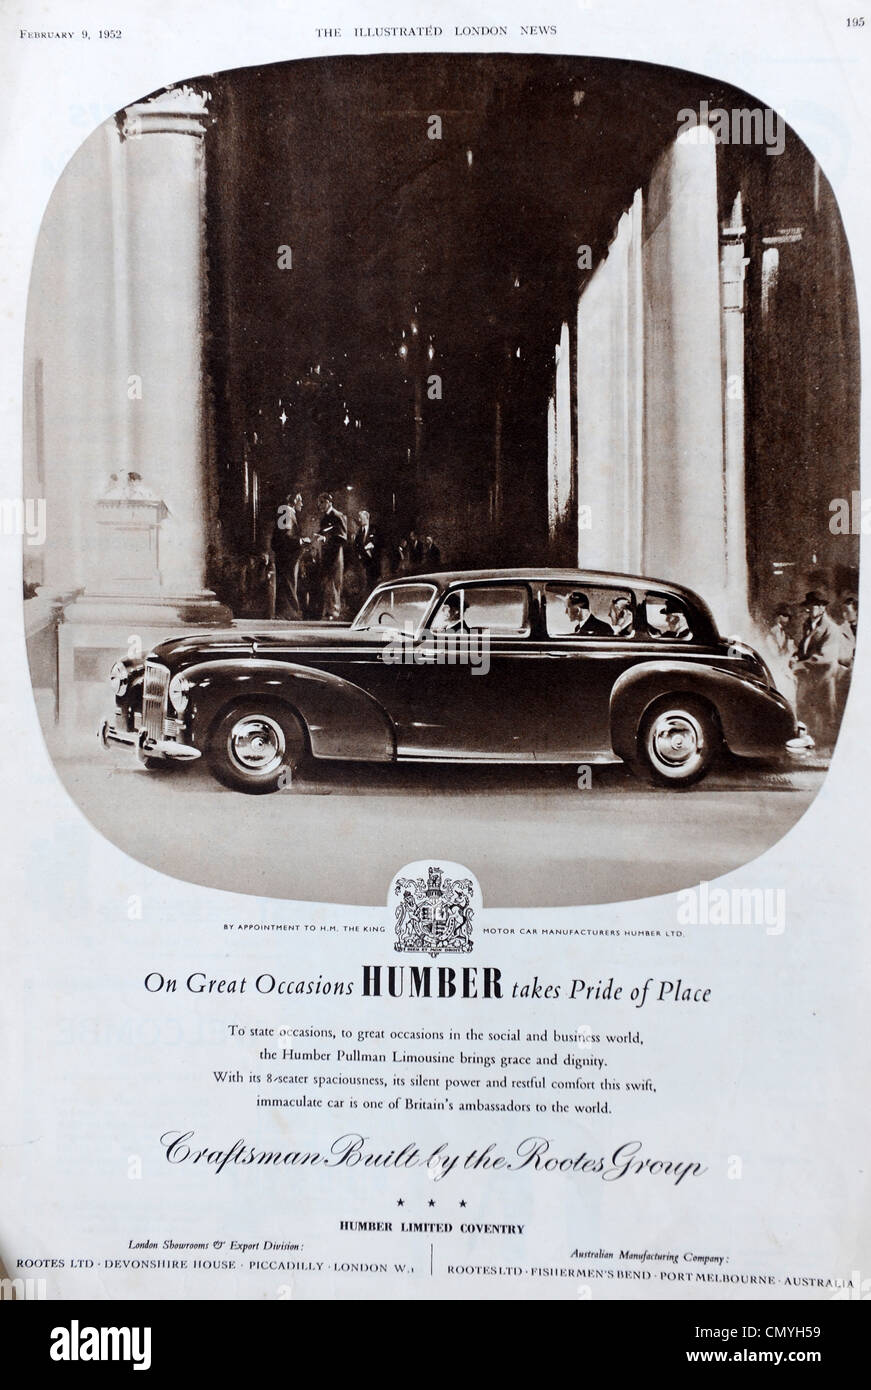 Humber car advert in The Illustrated London News 23/2/52 Stock Photo